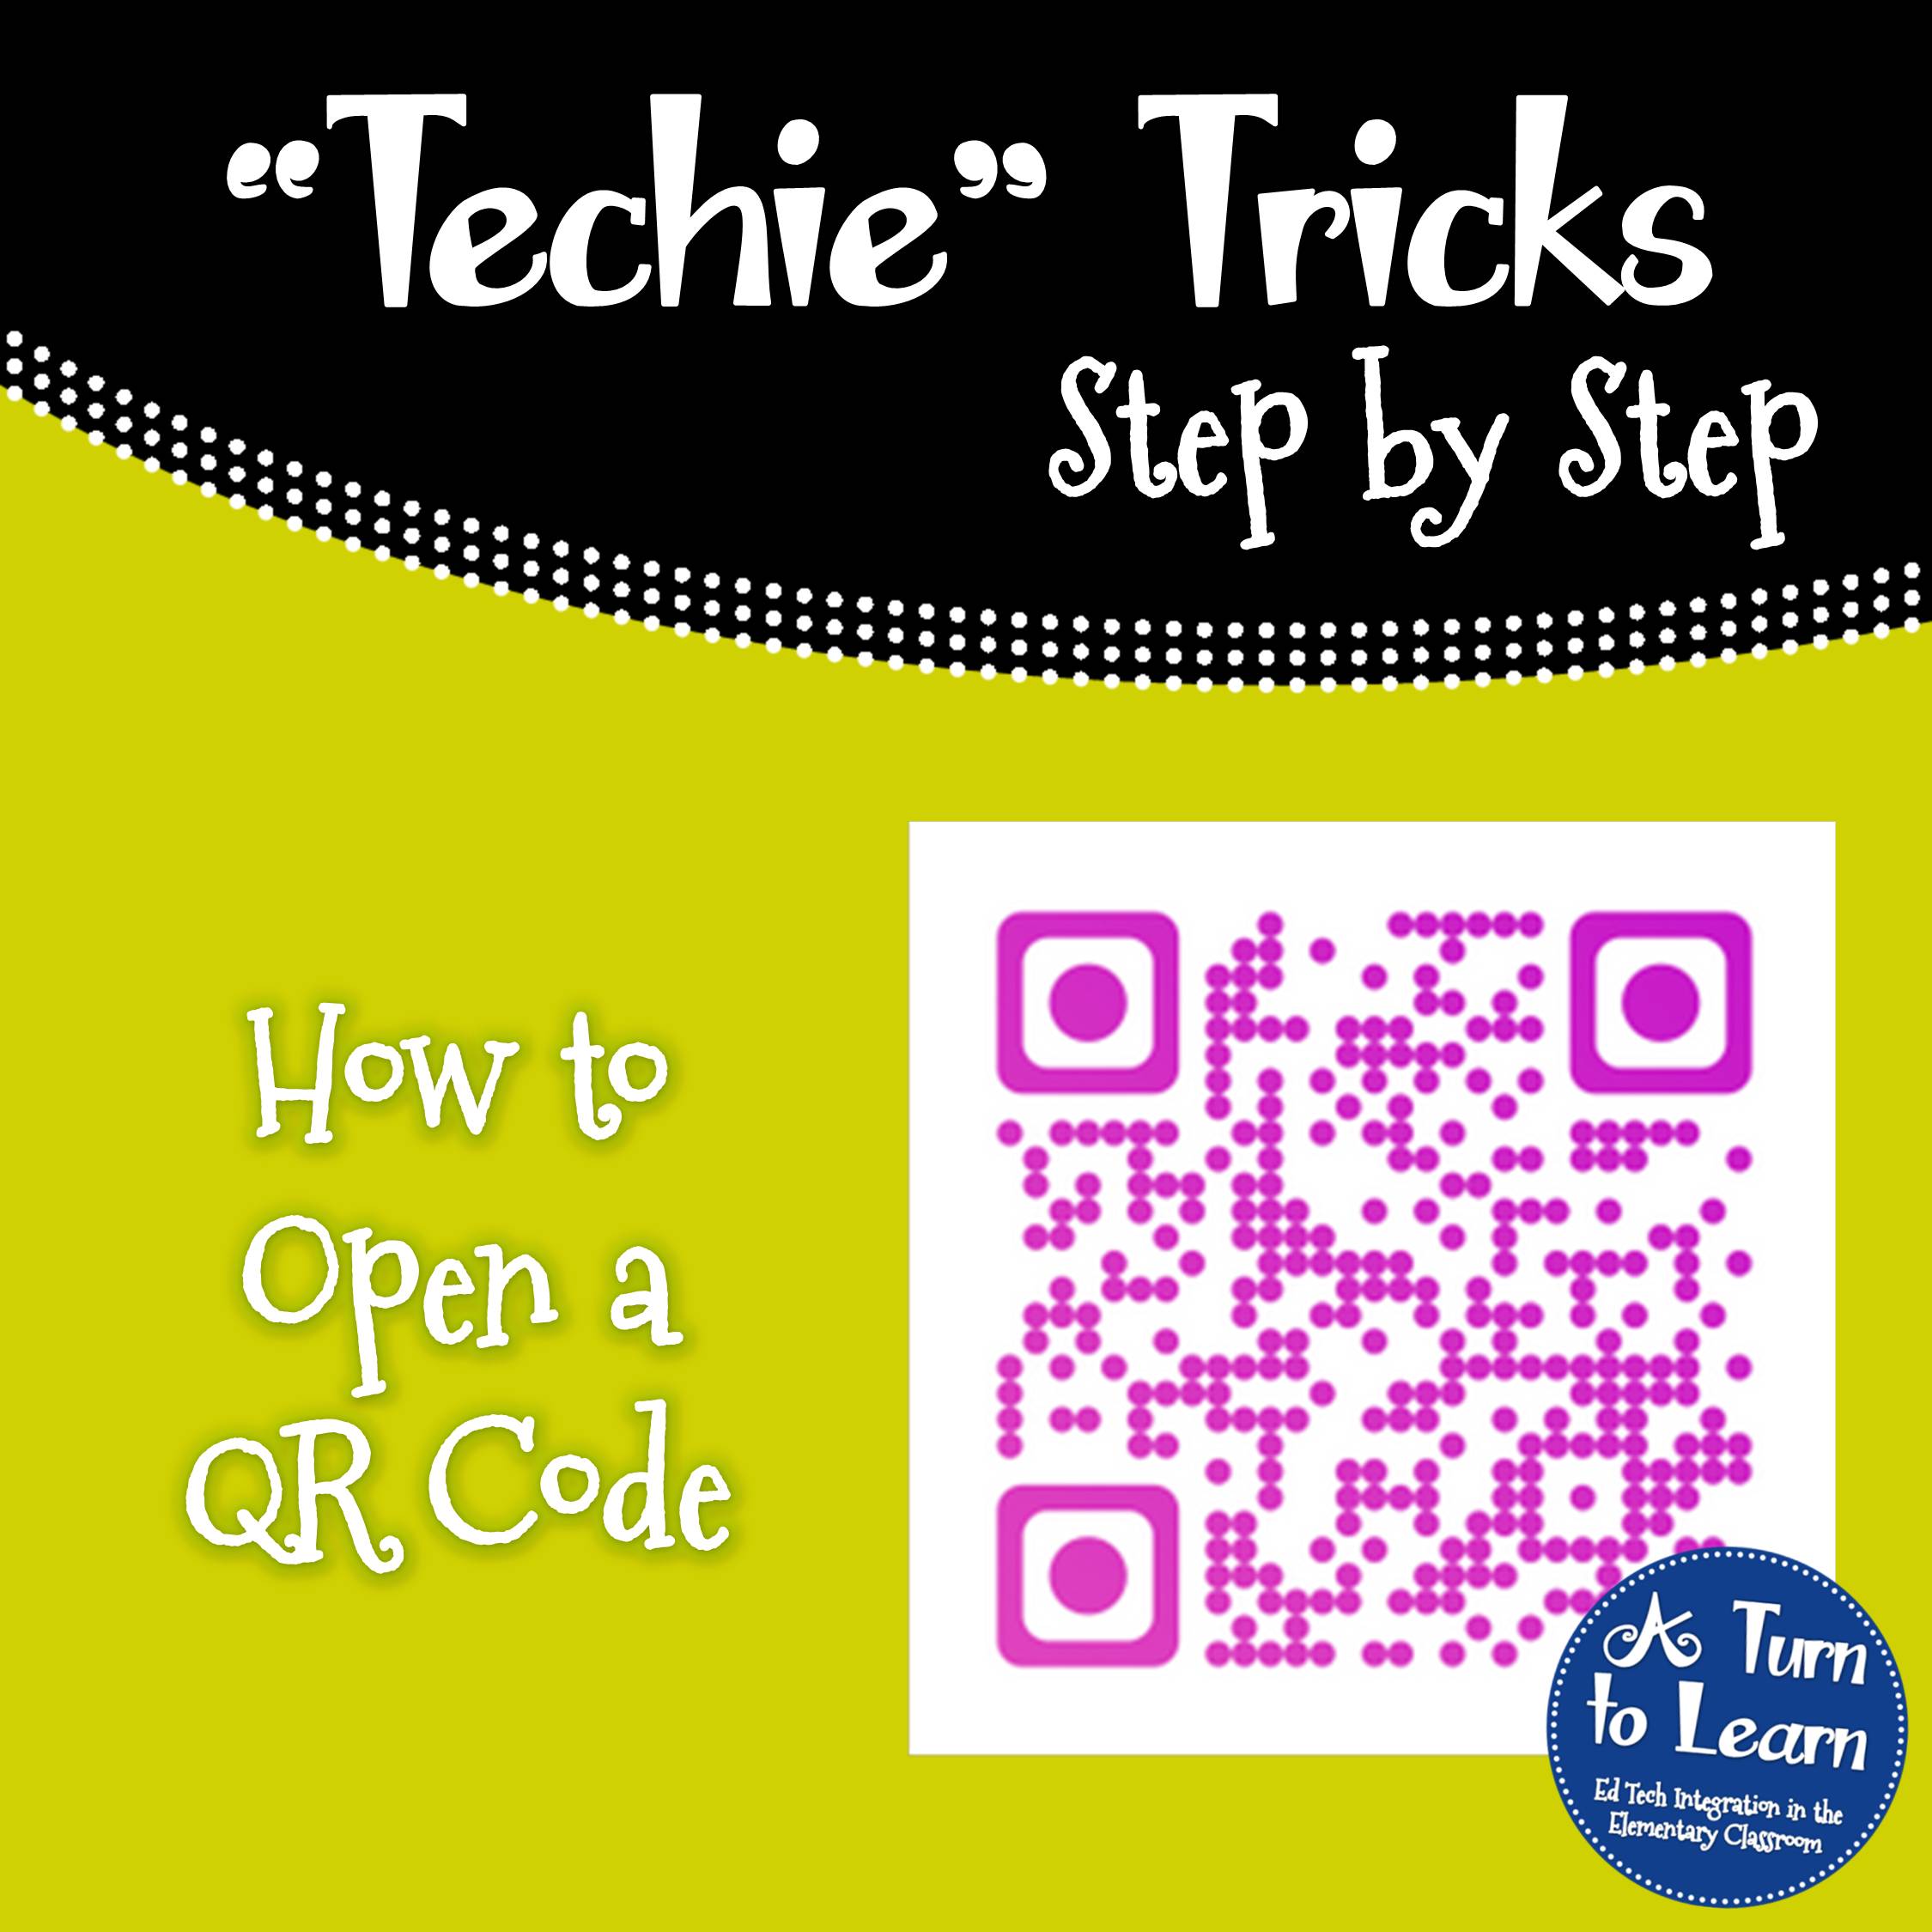 How to Open a QR Code